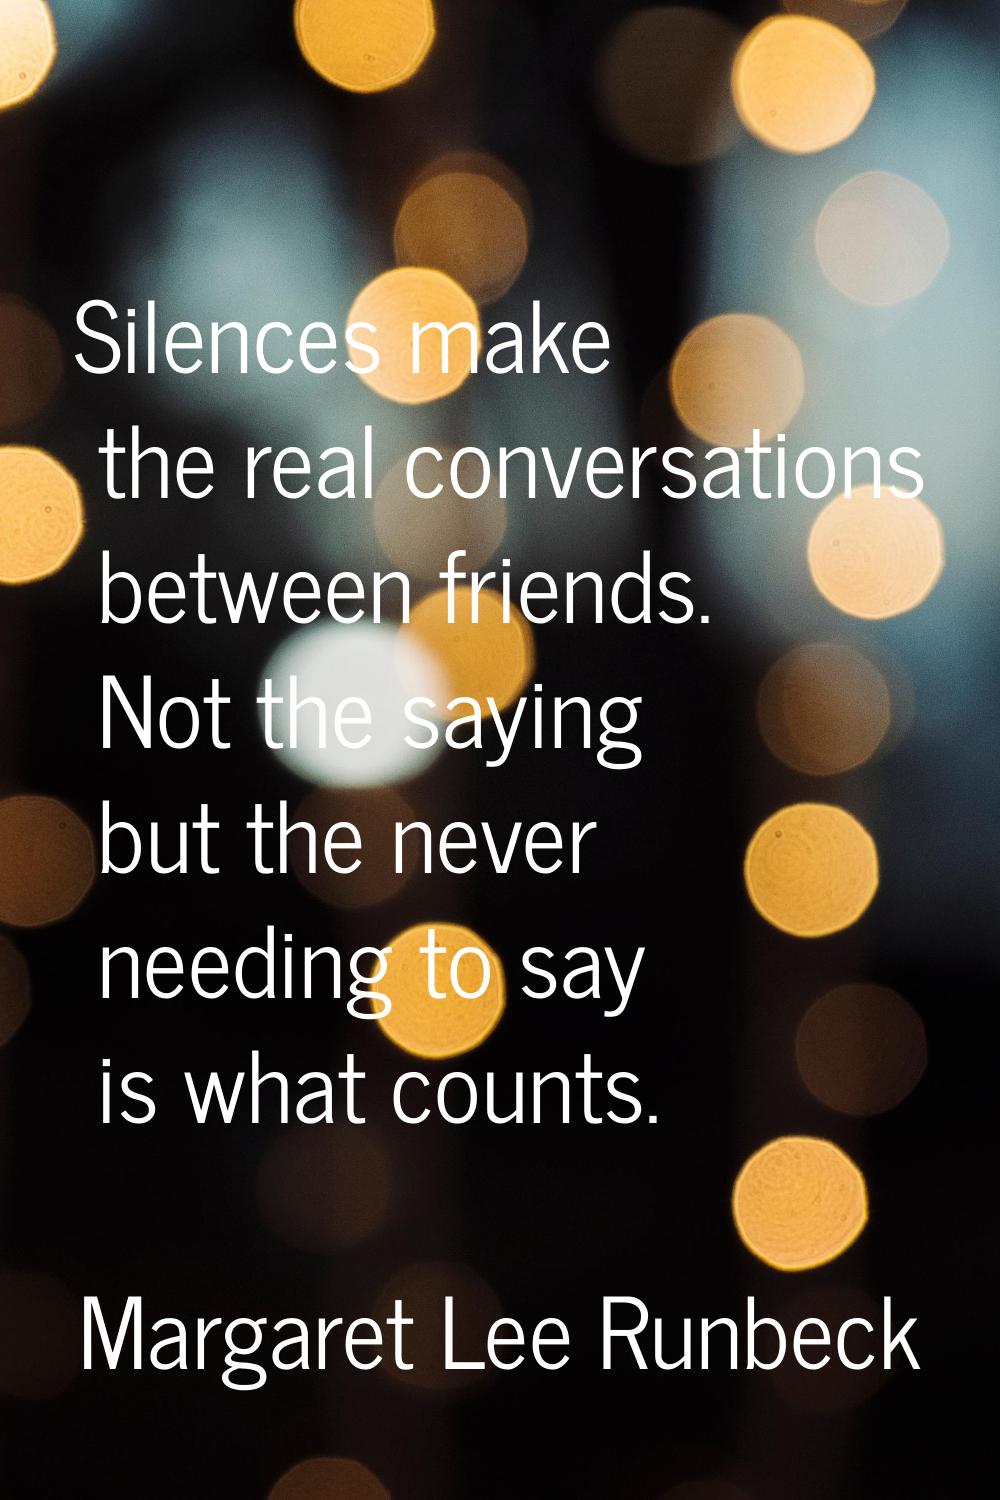 Silences make the real conversations between friends. Not the saying but the never needing to say i